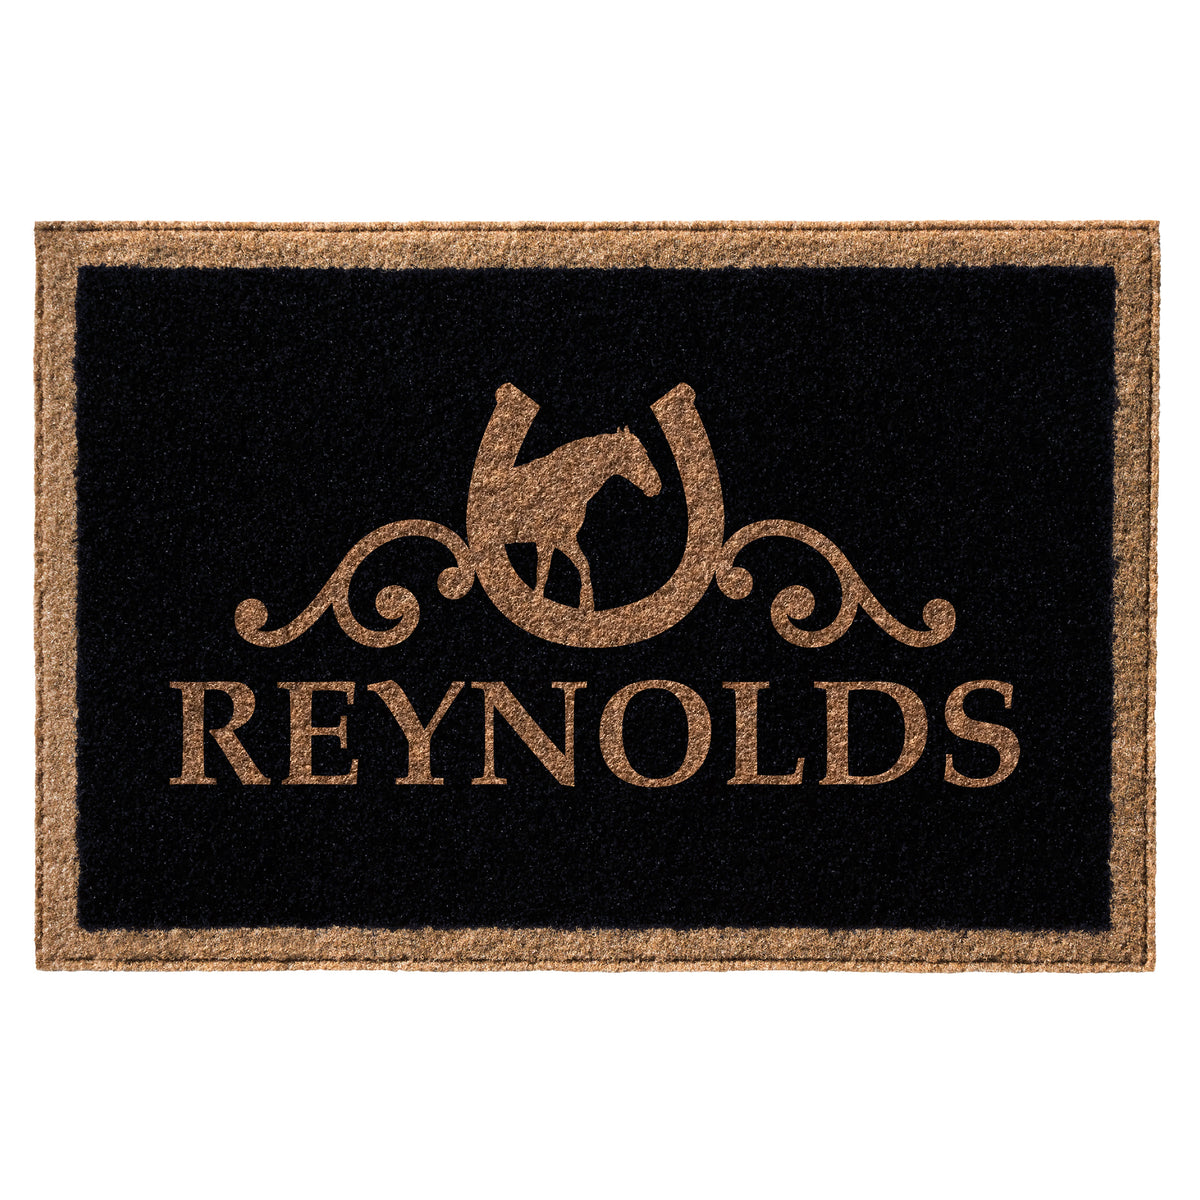 Infinity Custom Mats™ All-Weather Personalized Door Mat - STYLE: REYNOLDS COLOR:BLACK - rugsthatfit.com